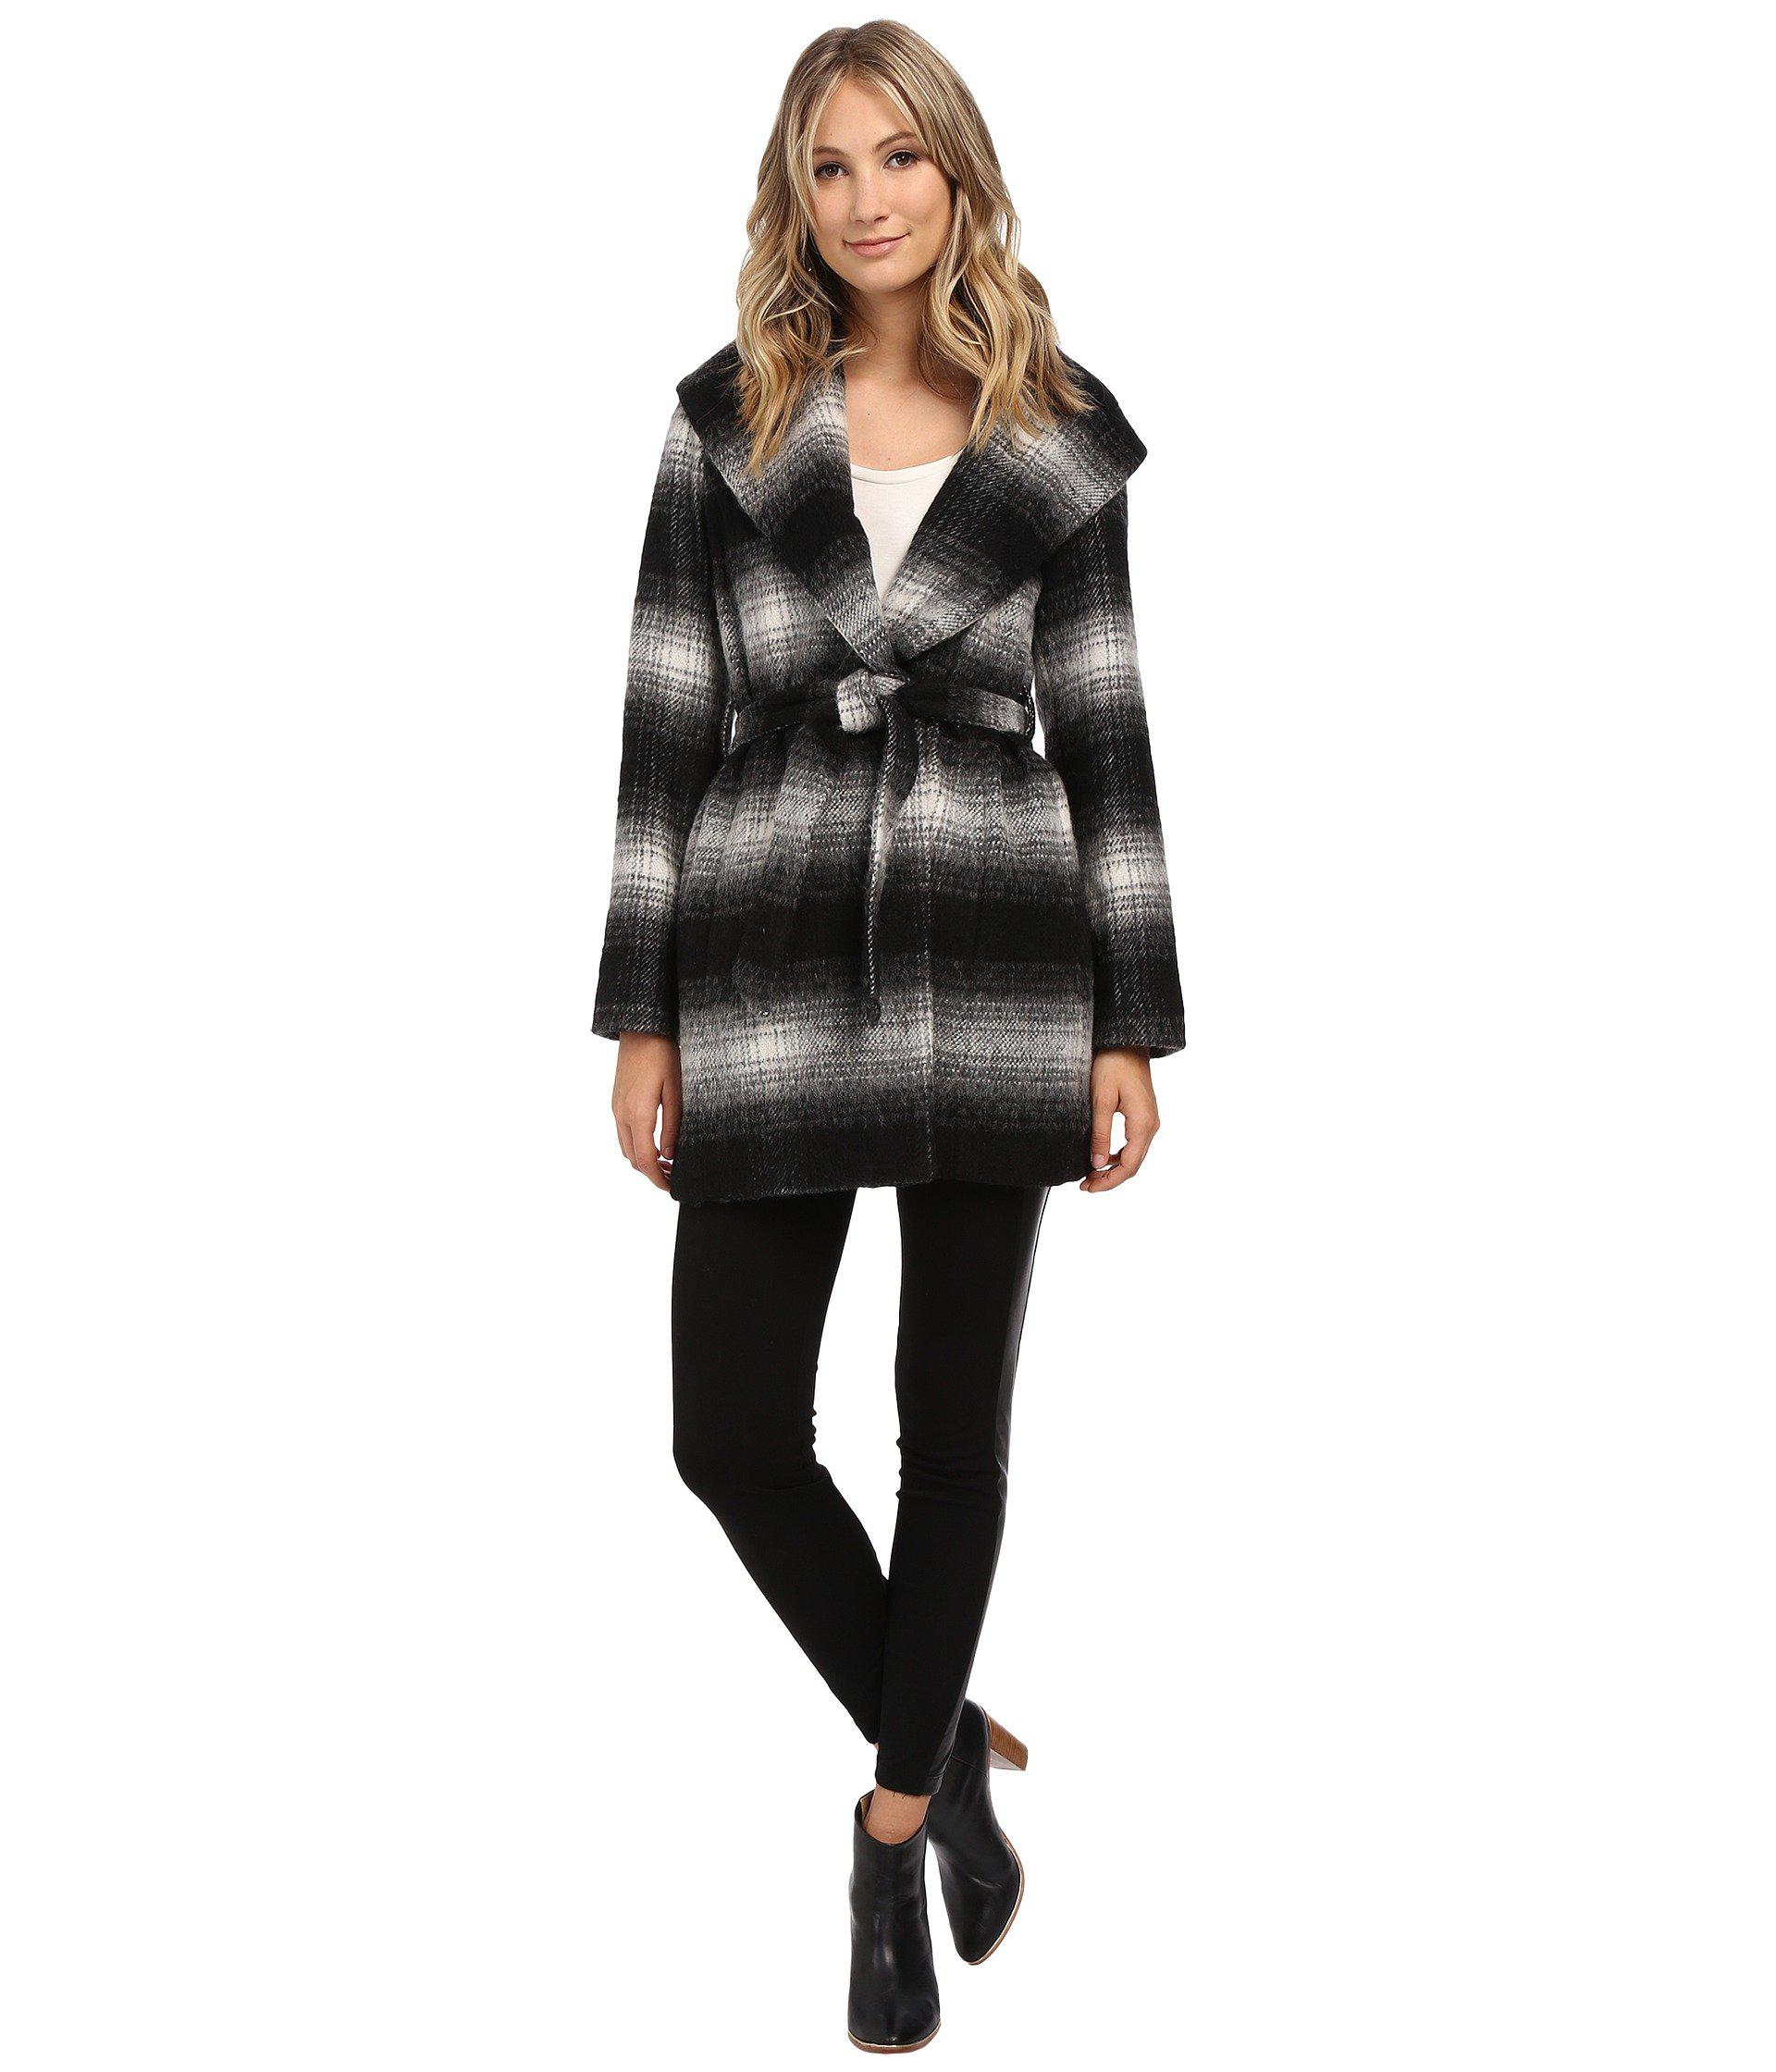 Jessica Simpson Brushed Wool Wrap Coat in Black - Lyst